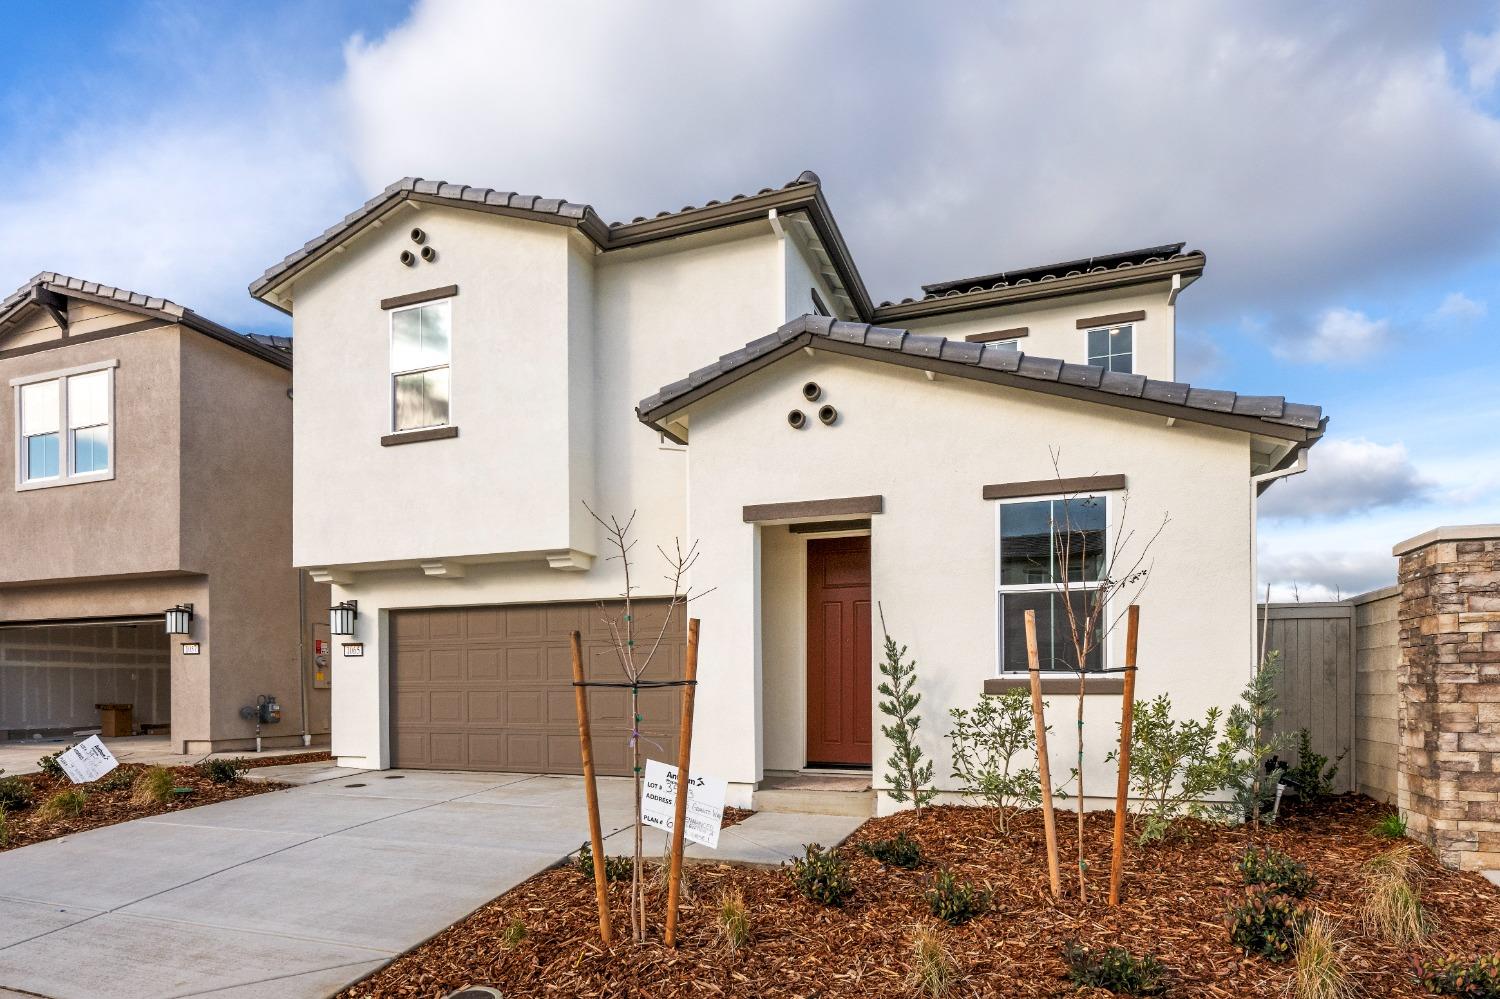 Photo of 1065 Granito Wy in Roseville, CA